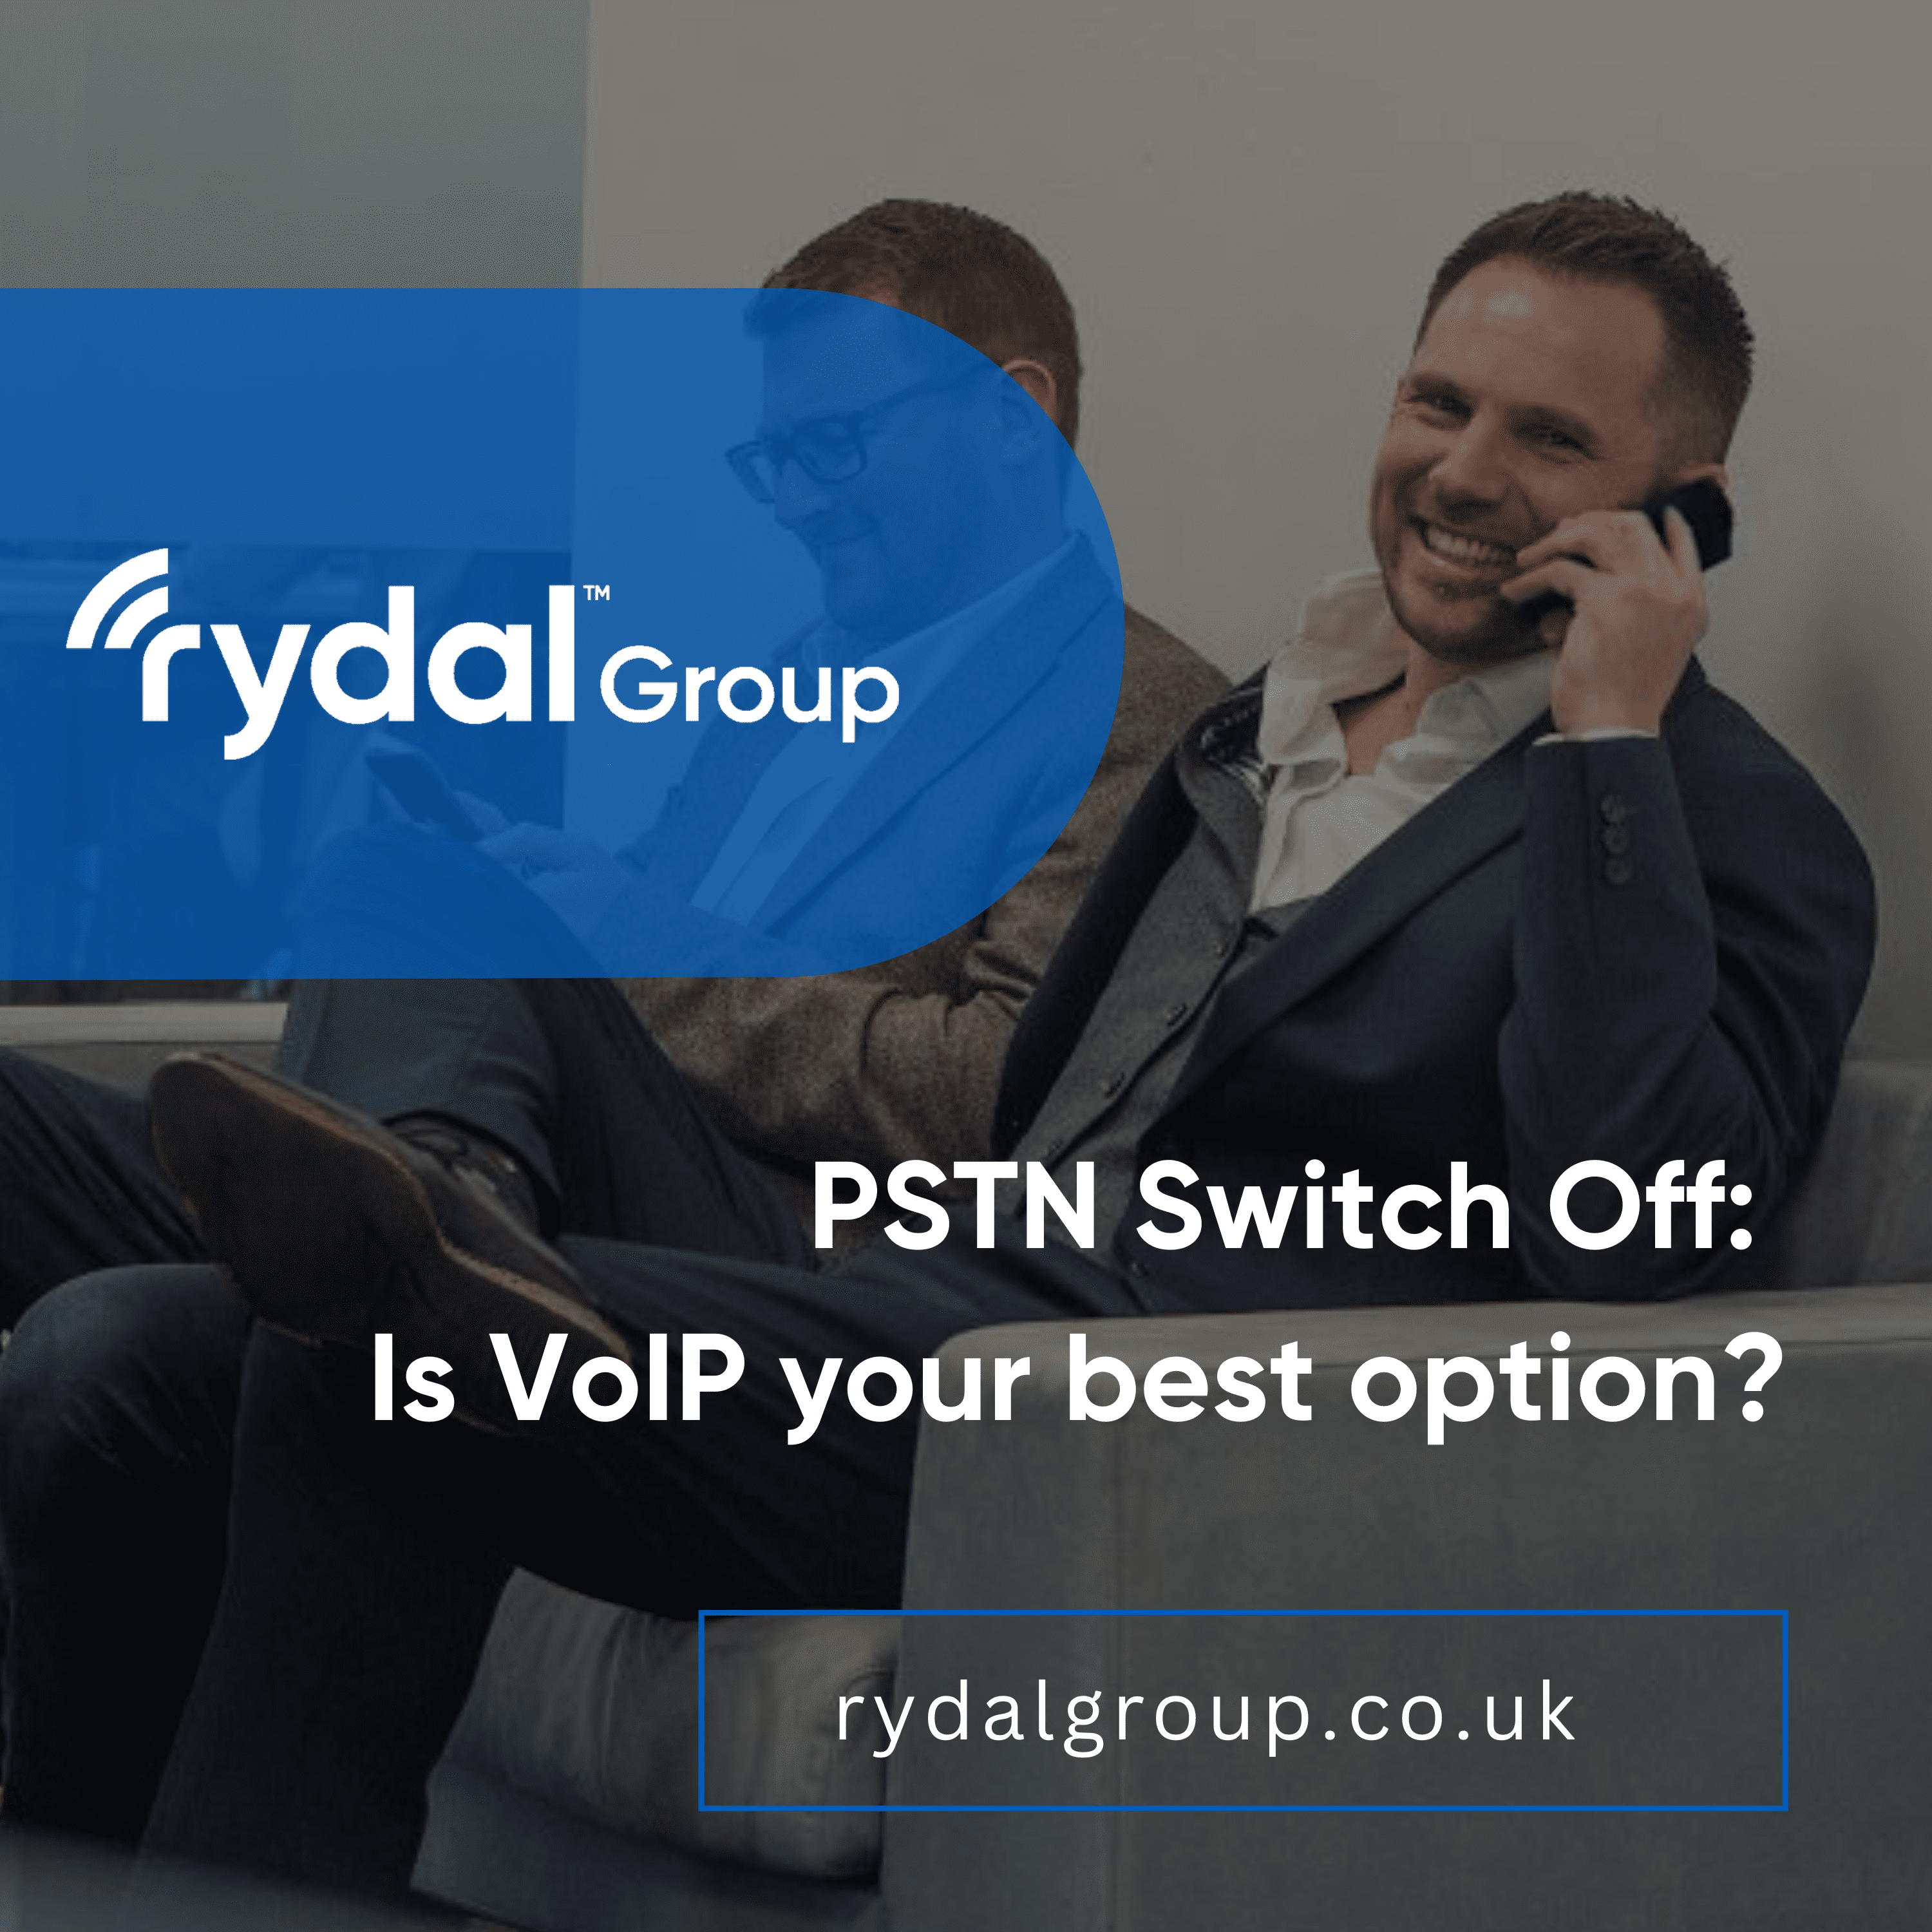 PSTN Switch Off: Is VoIP your best option?